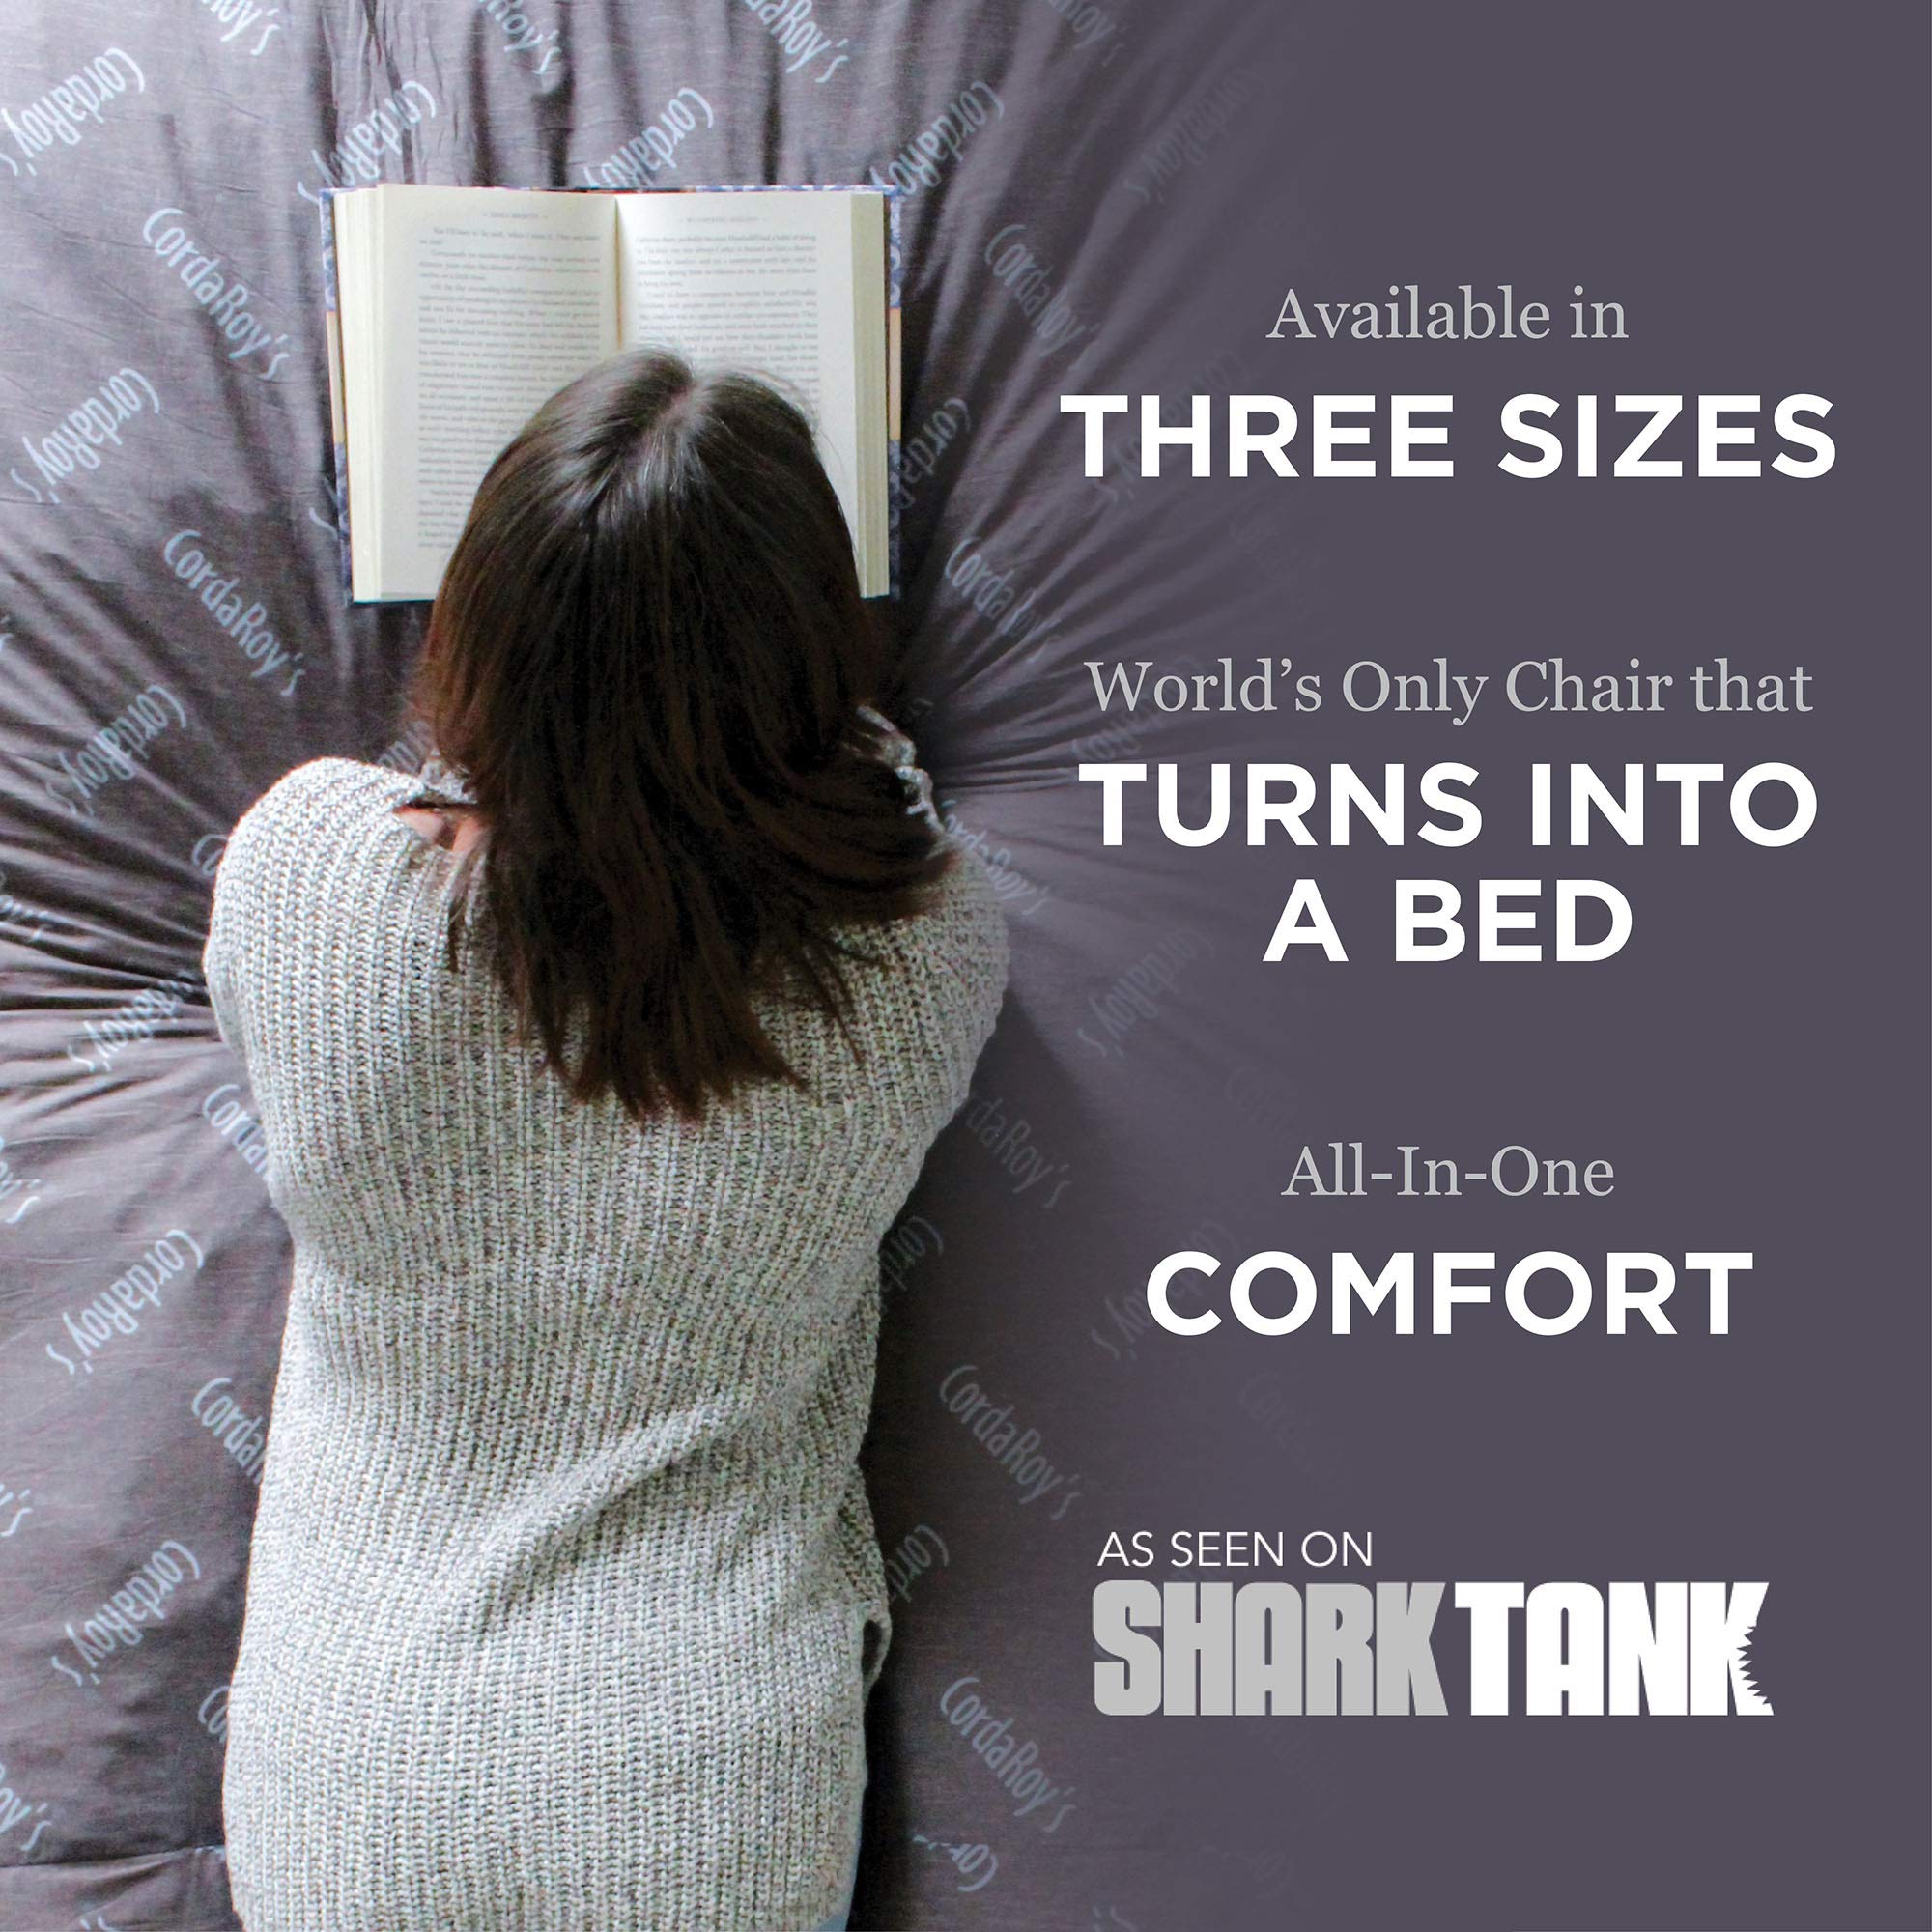 CordaRoy's Chenille Bean Bag Chair, Convertible Chair Folds from Bean Bag to Bed, As Seen on Shark Tank, Charcoal - Queen Size